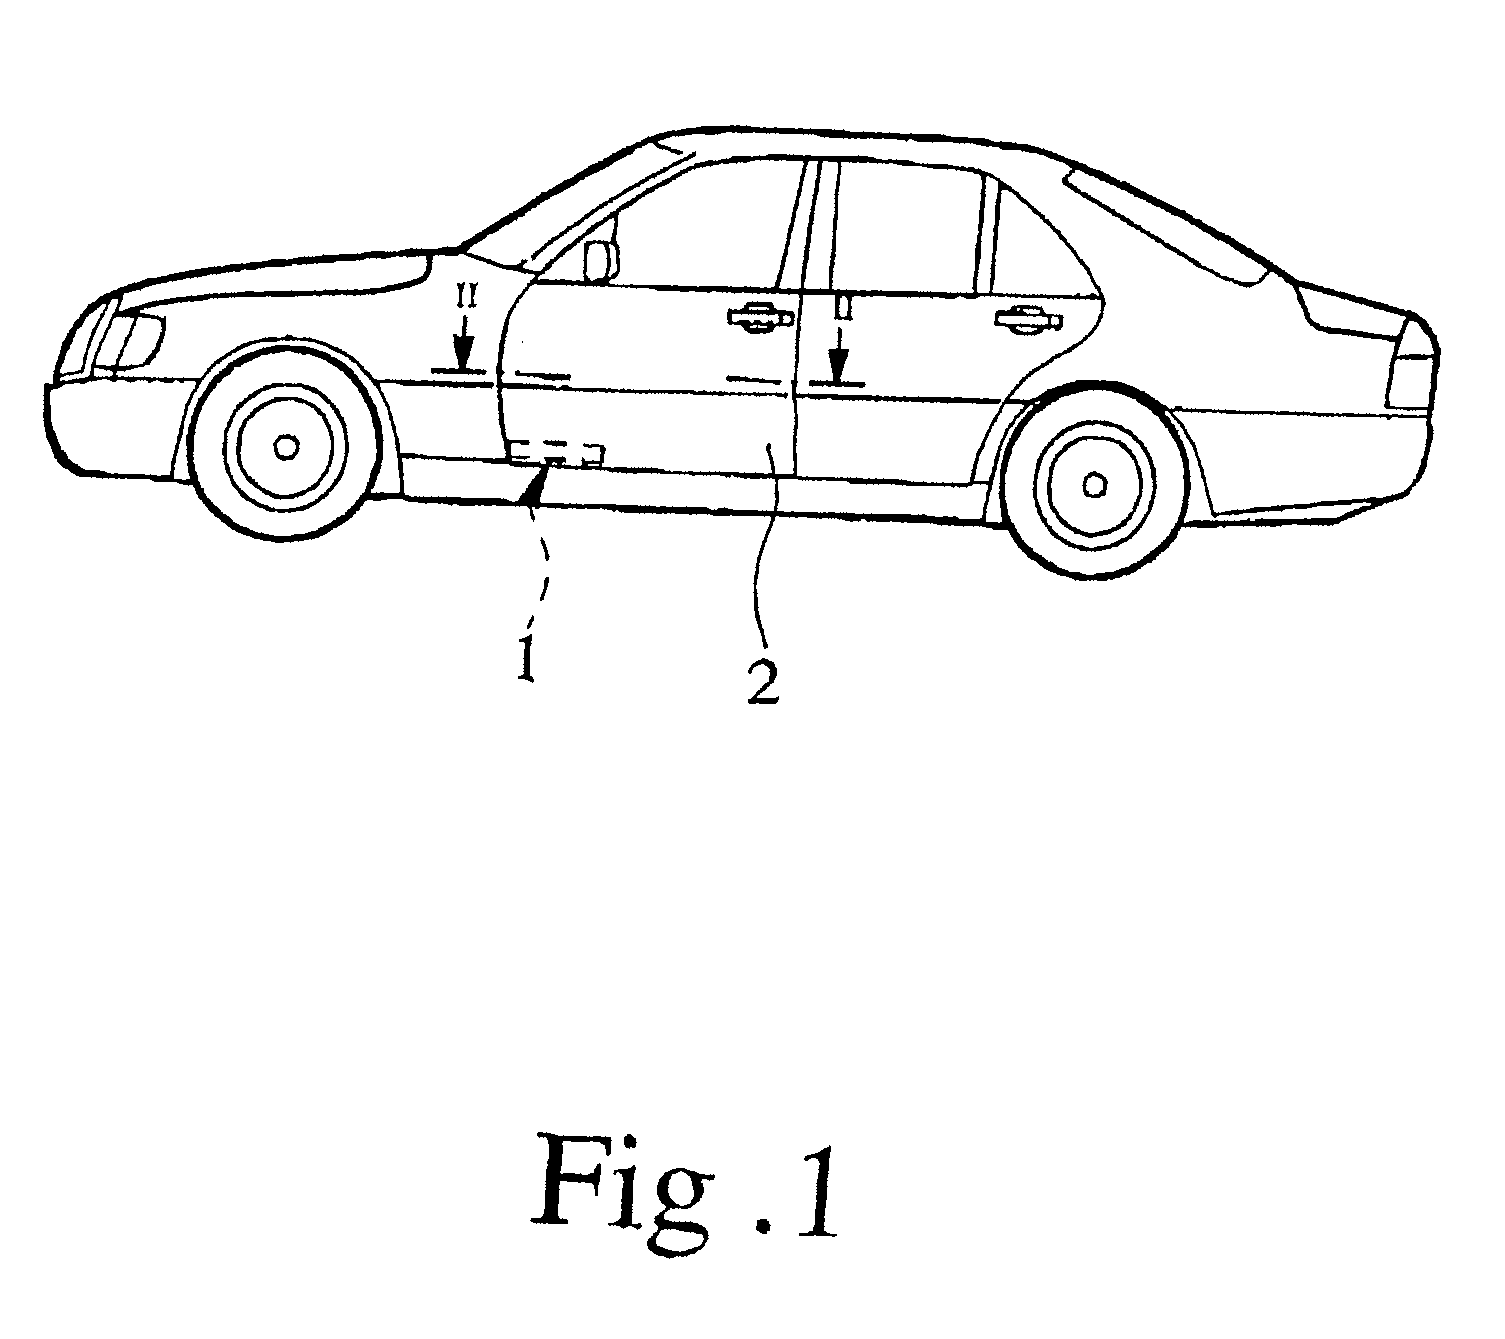 Drive arrangement for motorized movement of a motor vehicle door or the like